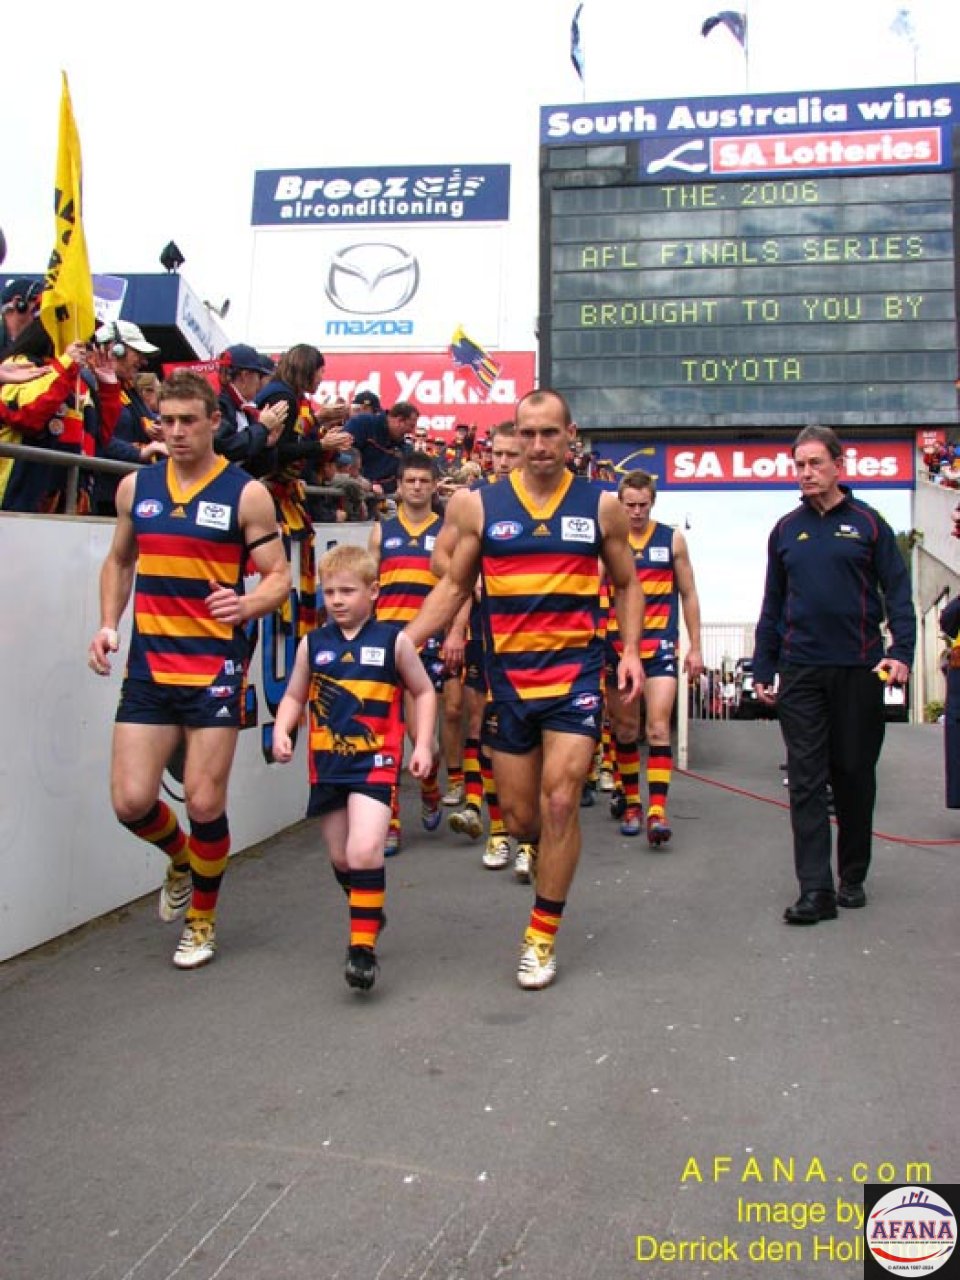 [b]Simon Goodwin and Tyson Edwards lead the Adelaide Crows out to battle[/b]